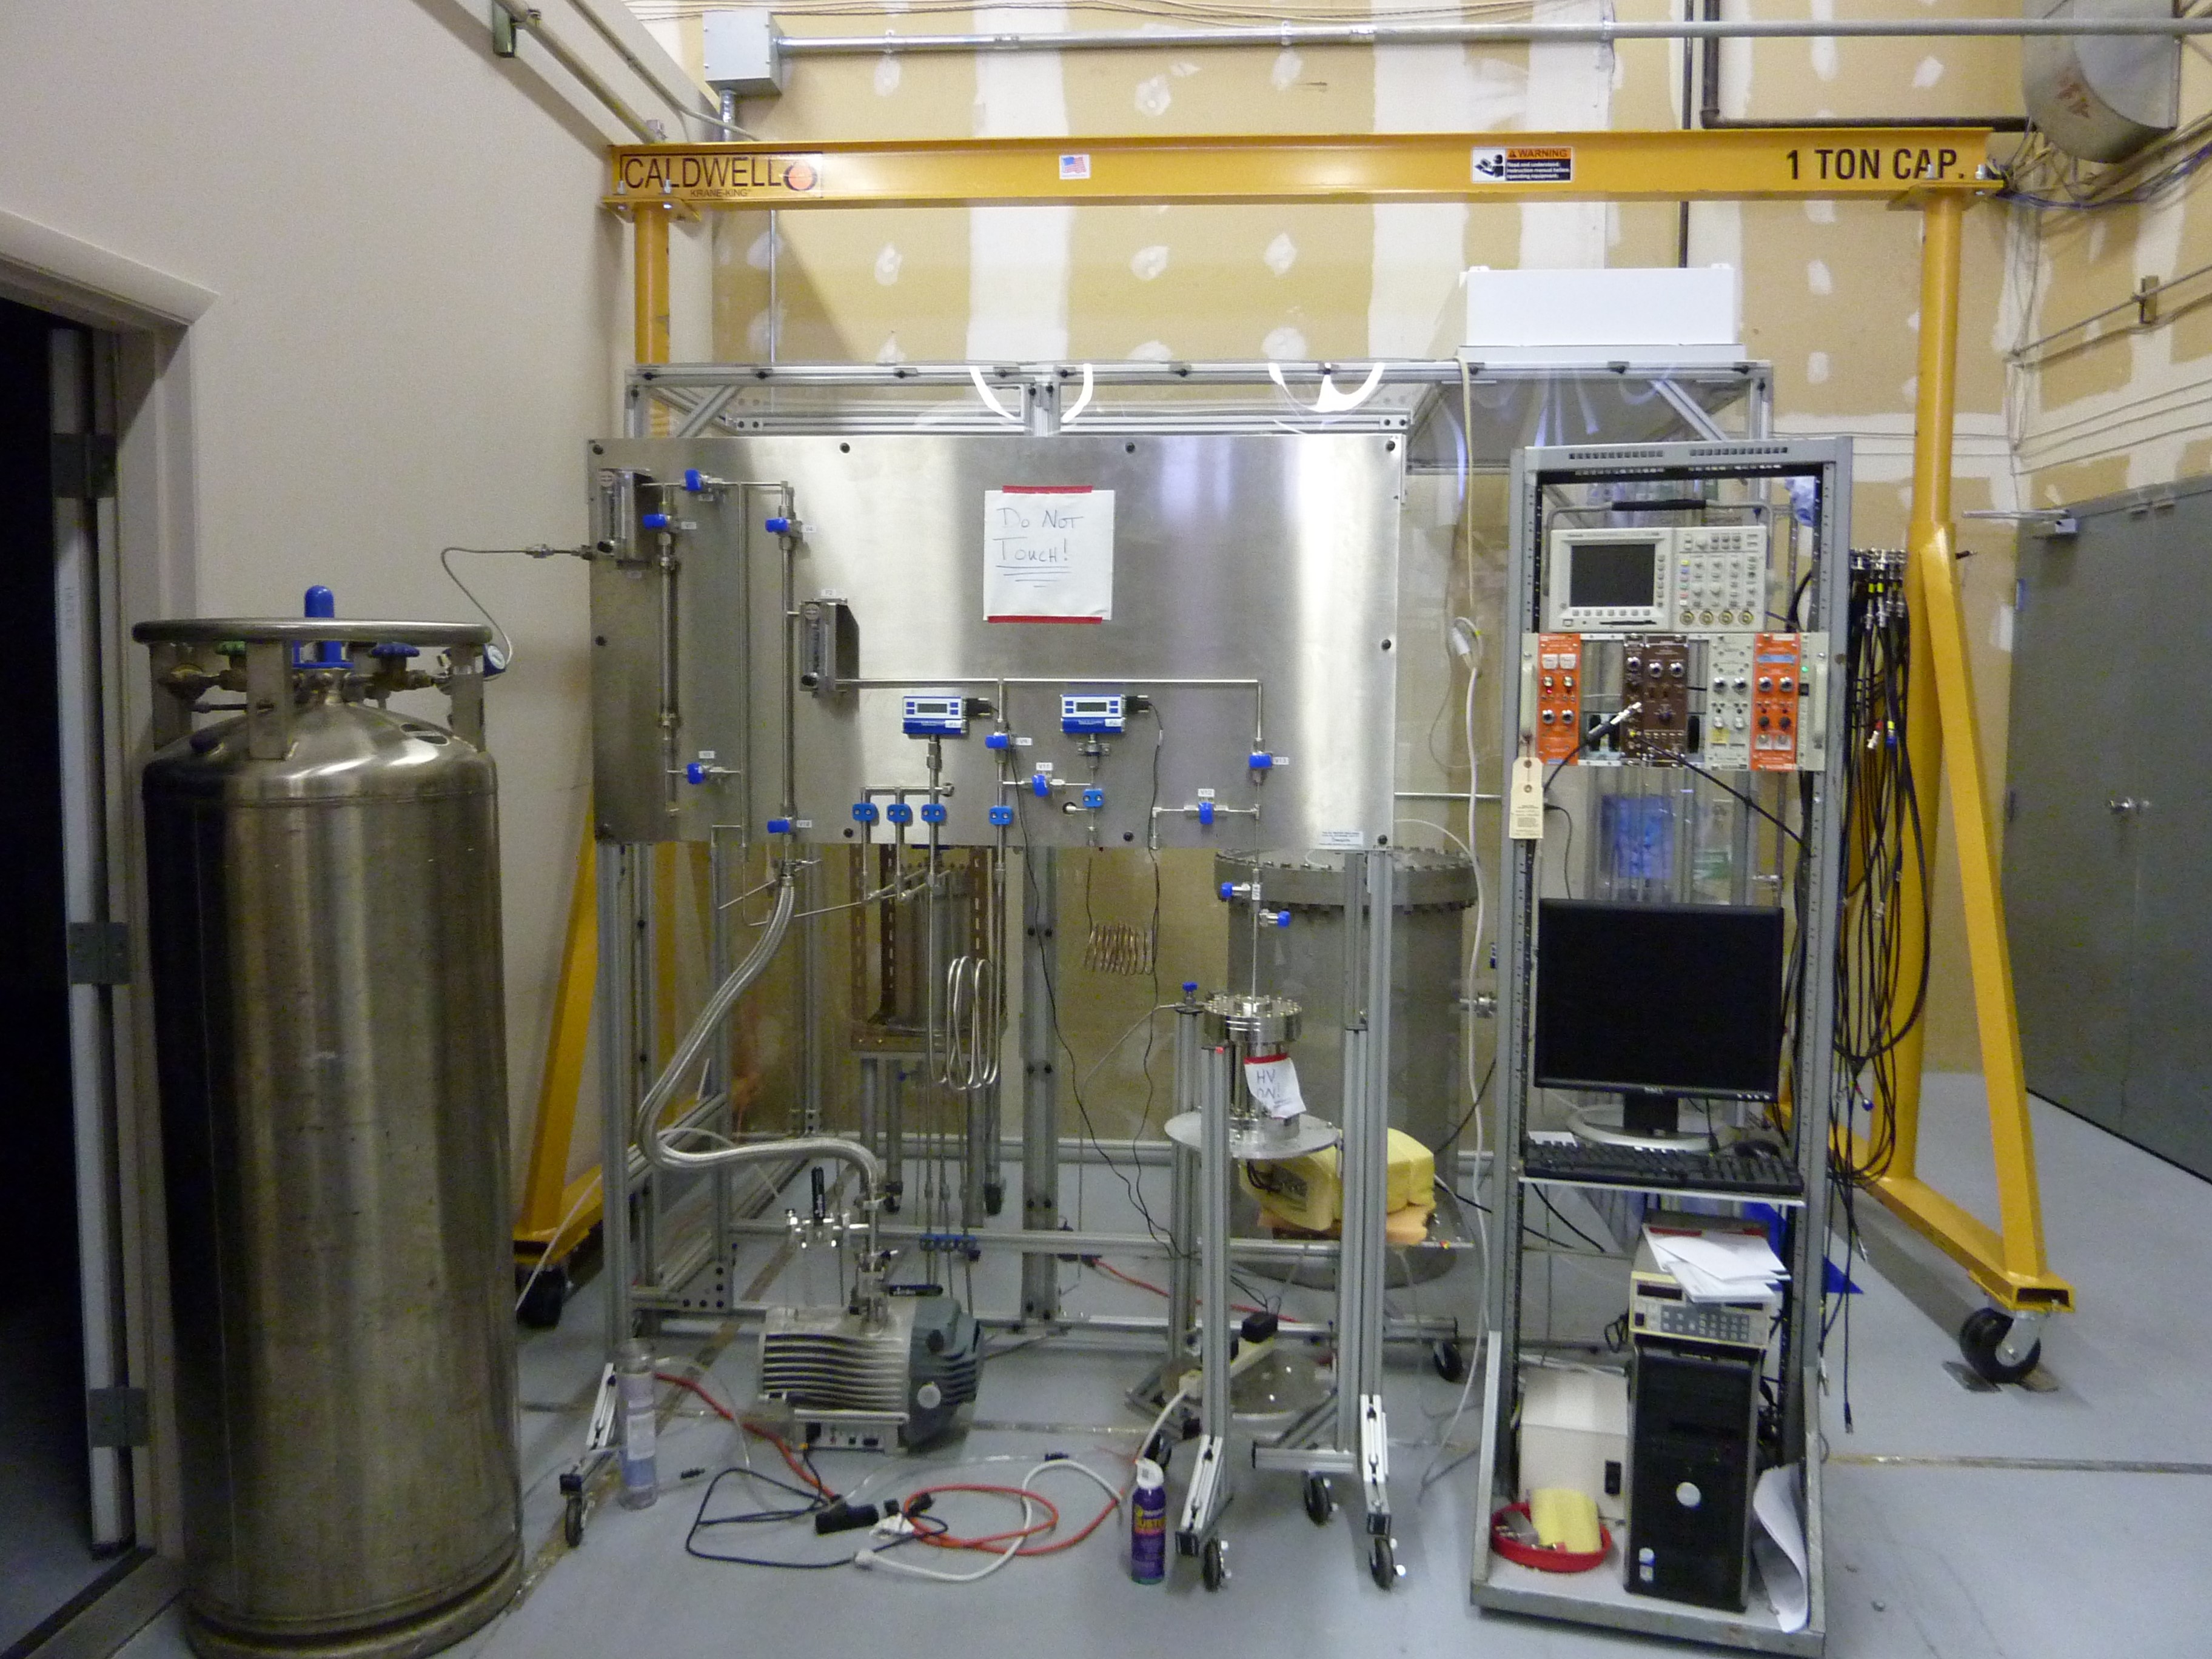 The radon emanation system to be used in the new physics laboratory space on the campus of the South Dakota School of Mines & Technology is designed to detect individual atoms of radon.